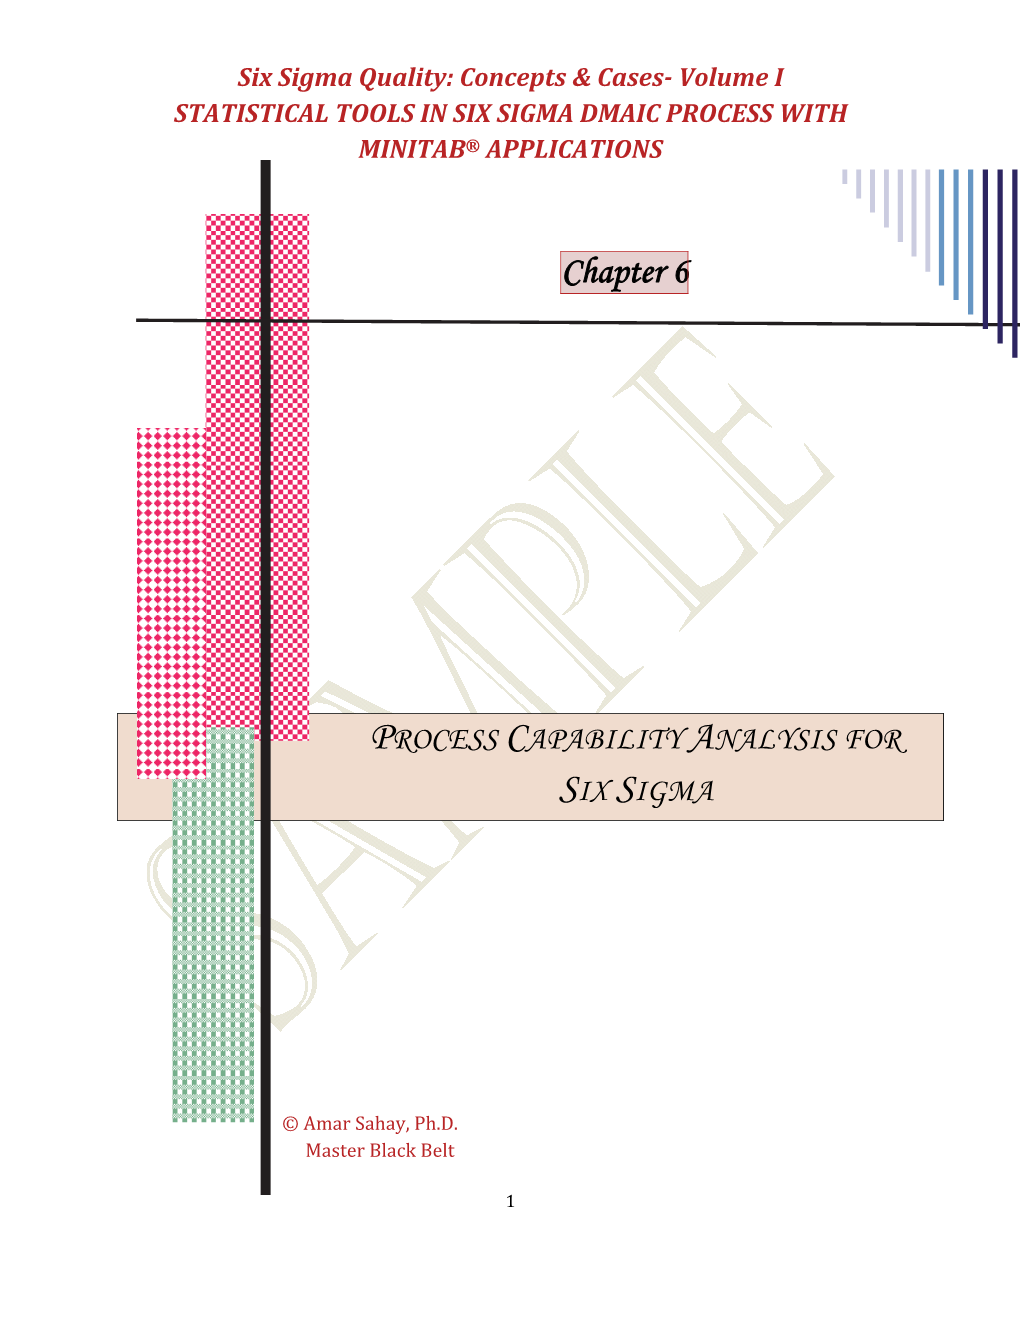 Chapter 6: Process Capability Analysis for Six Sigma